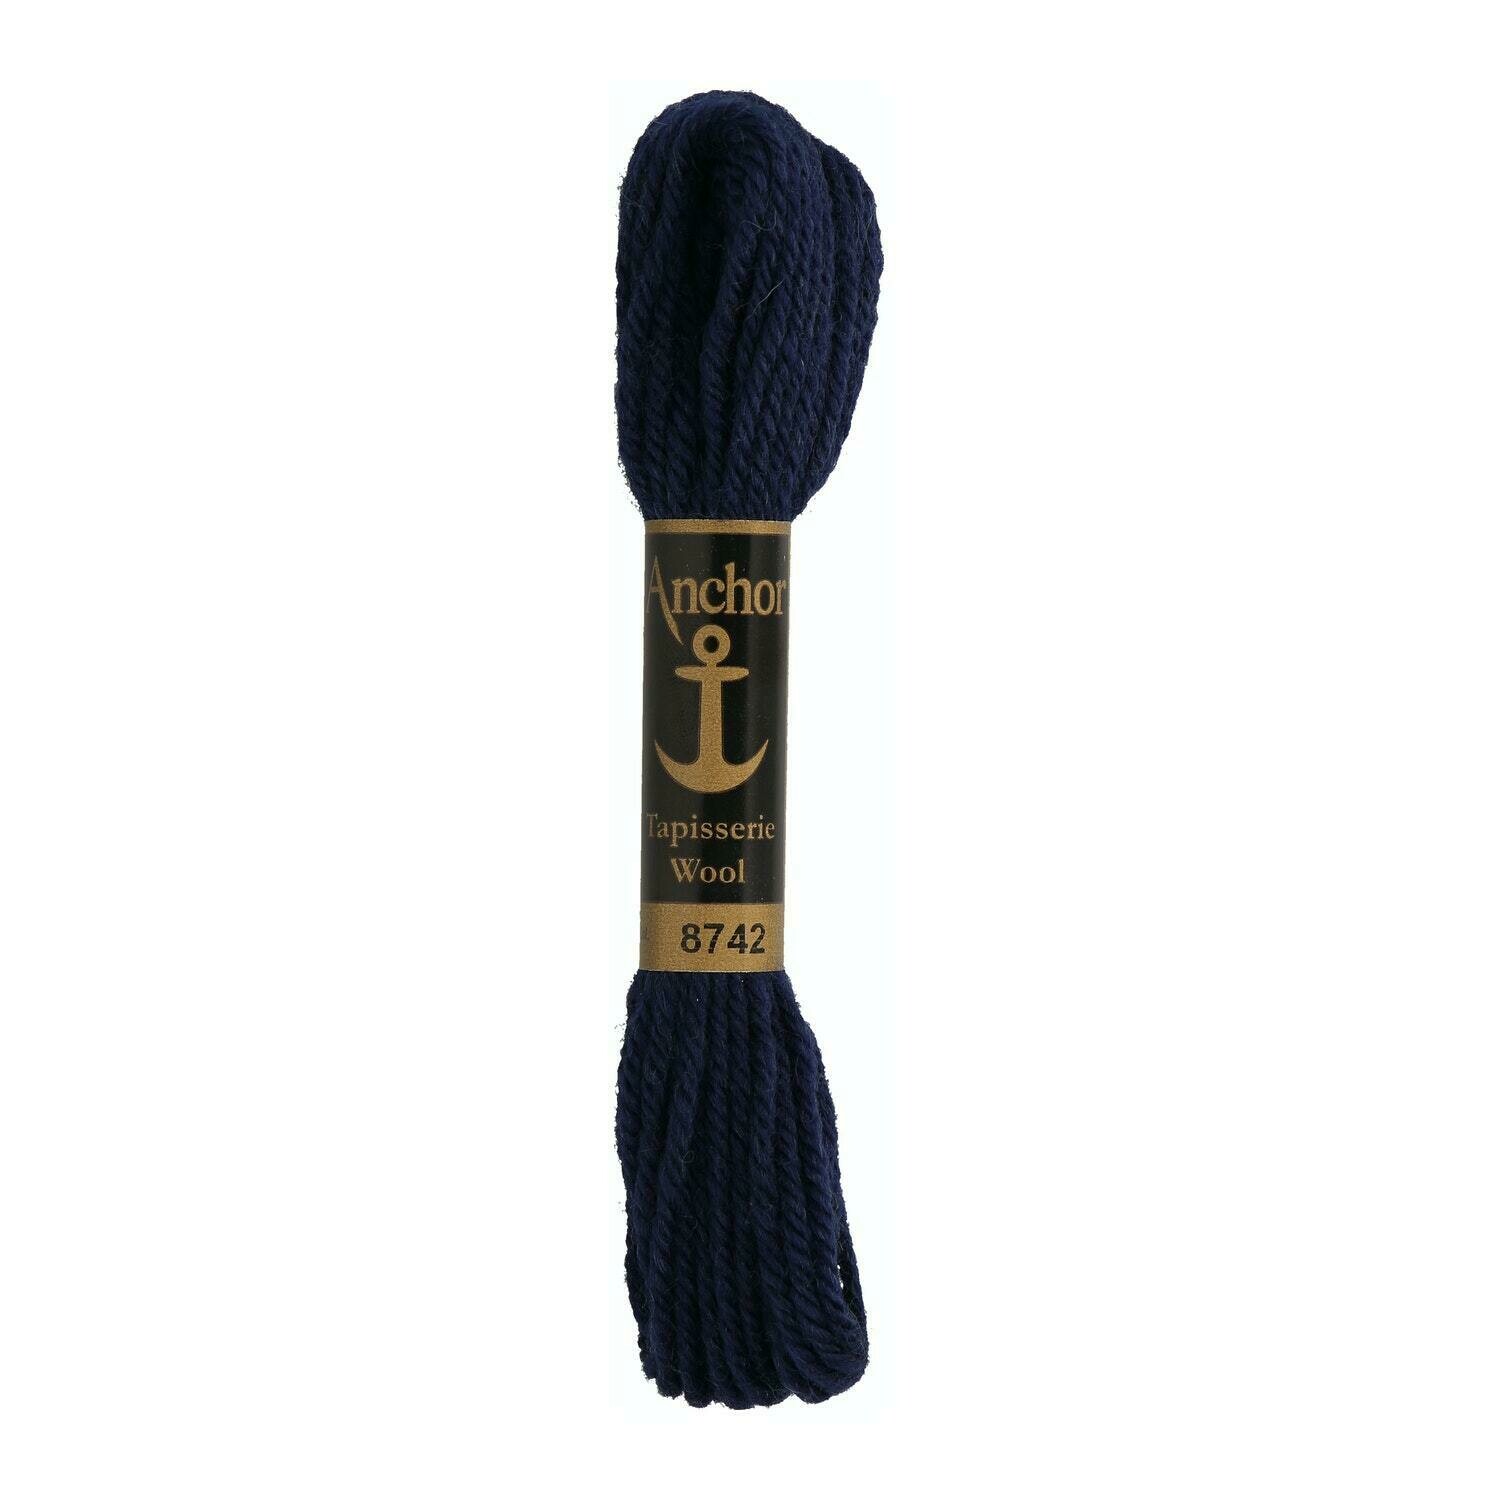 Anchor Tapisserie Wool #08742